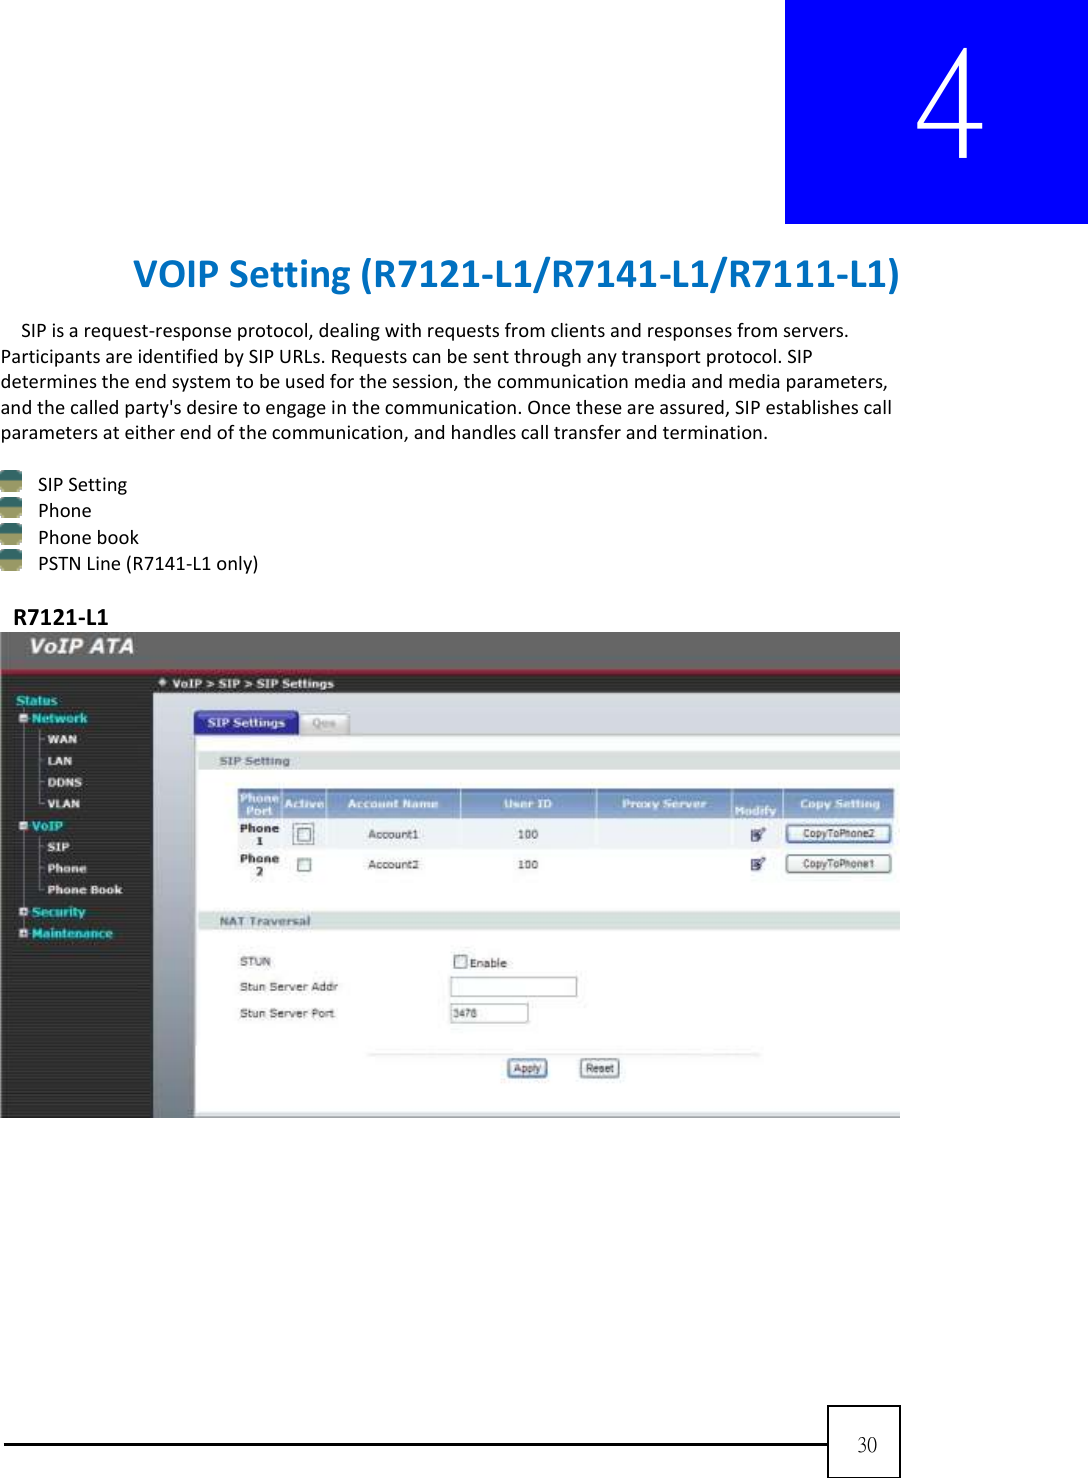  30  4      VOIP Setting (R7121-L1/R7141-L1/R7111-L1) SIP is a request-response protocol, dealing with requests from clients and responses from servers. Participants are identified by SIP URLs. Requests can be sent through any transport protocol. SIP determines the end system to be used for the session, the communication media and media parameters, and the called party&apos;s desire to engage in the communication. Once these are assured, SIP establishes call parameters at either end of the communication, and handles call transfer and termination.     SIP Setting  Phone  Phone book  PSTN Line (R7141-L1 only)    R7121-L1  